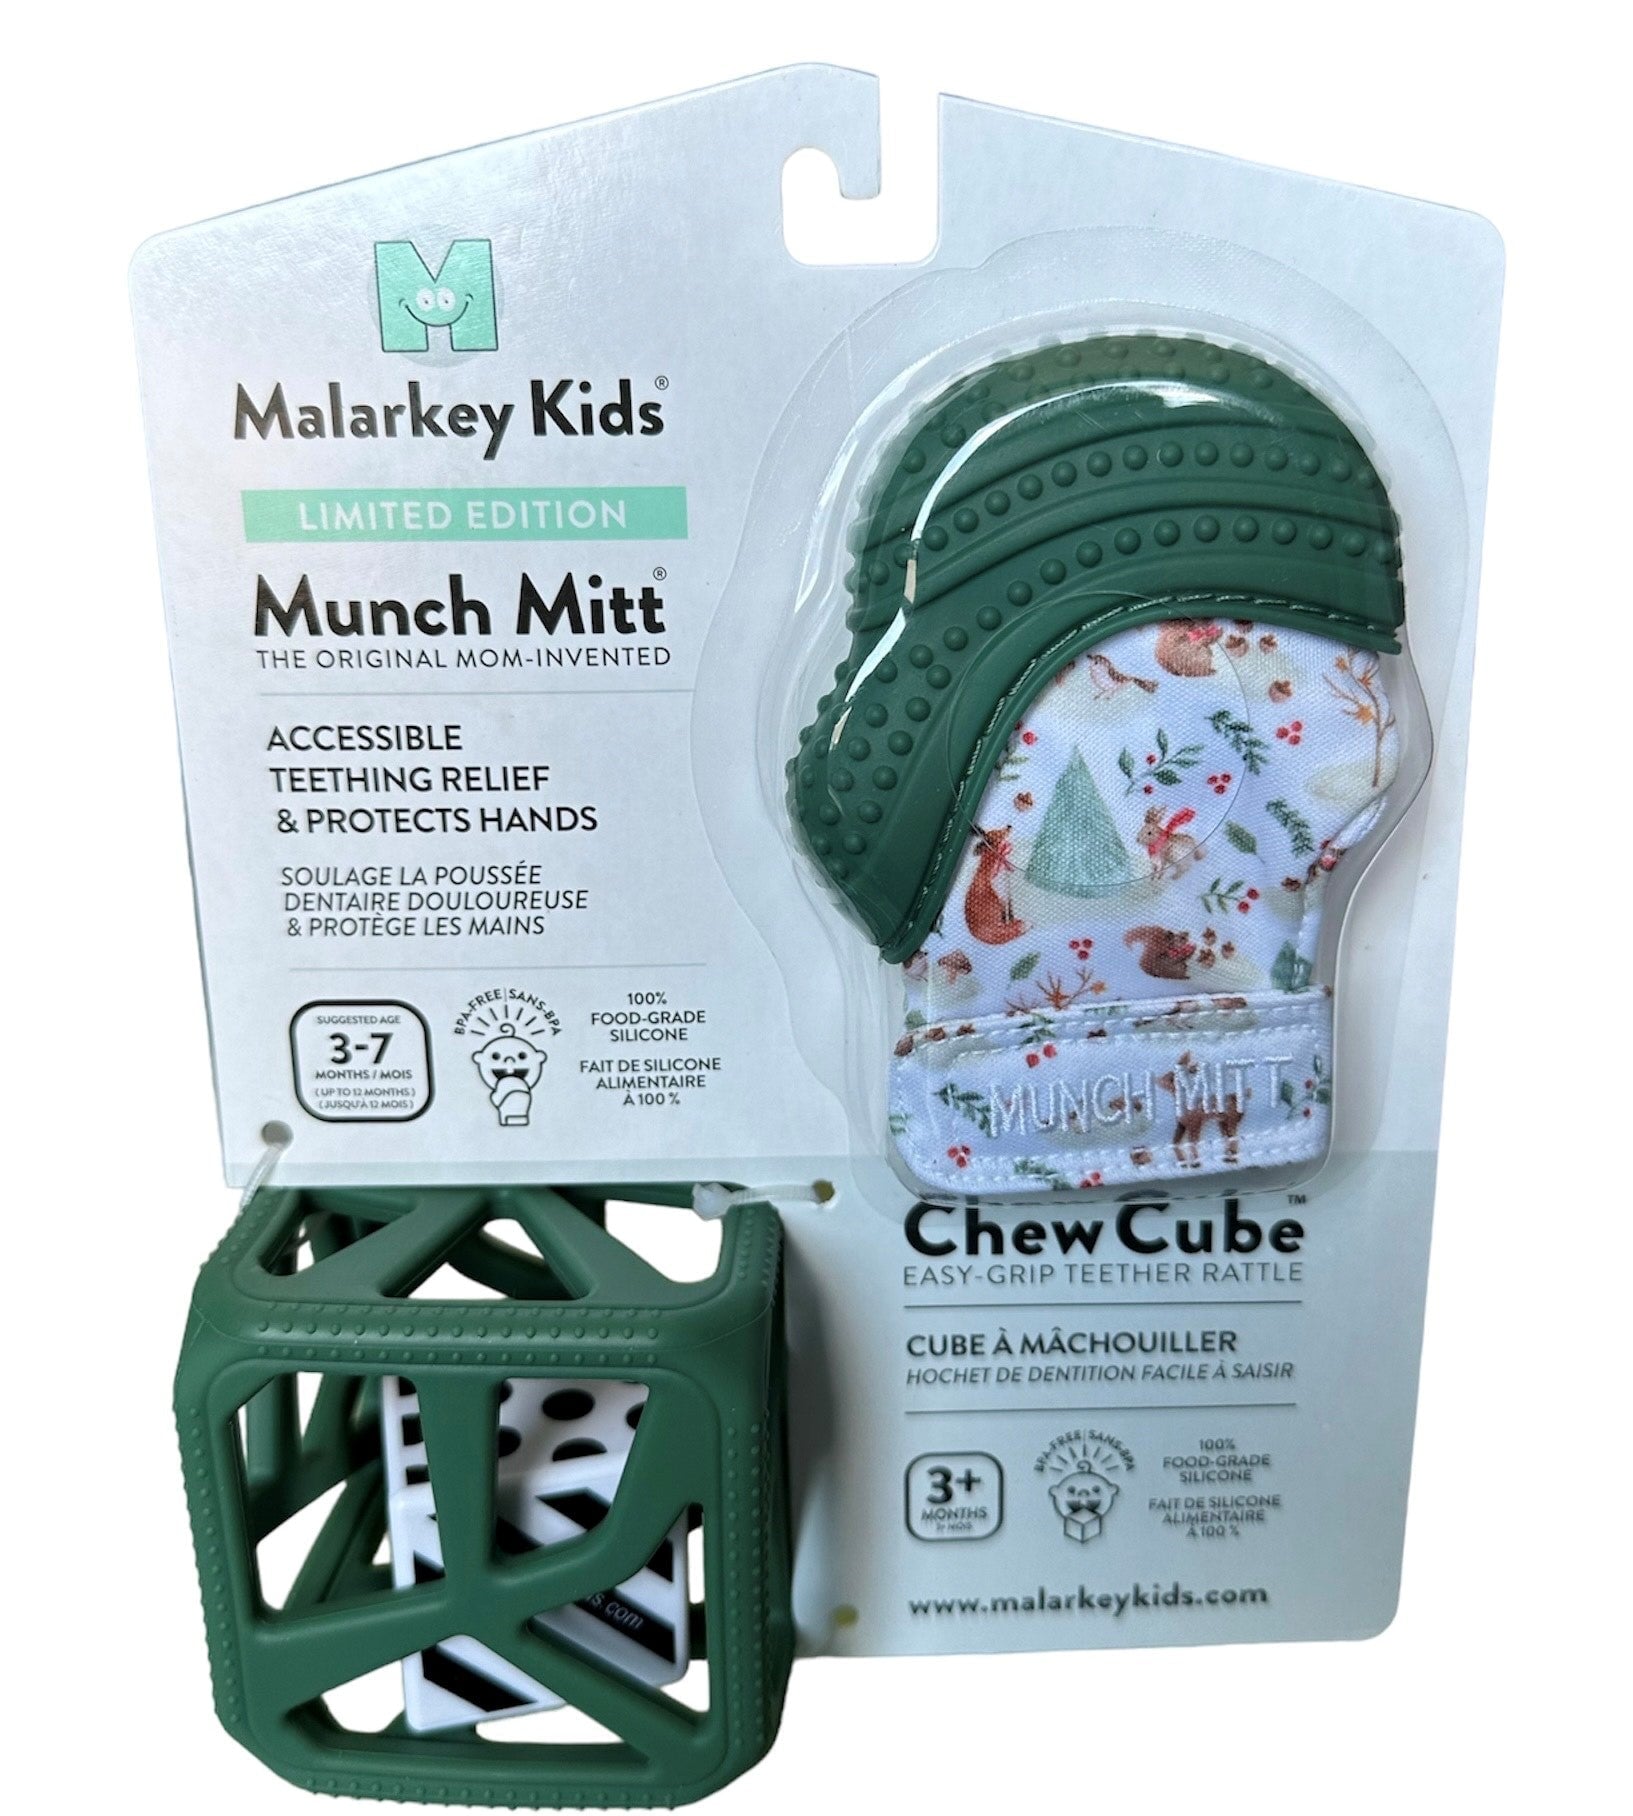 Limited Edition Holiday Gift Pack: Munch Mitt and Chew Cube Duo Chew Cube Malarkey Kids CA 